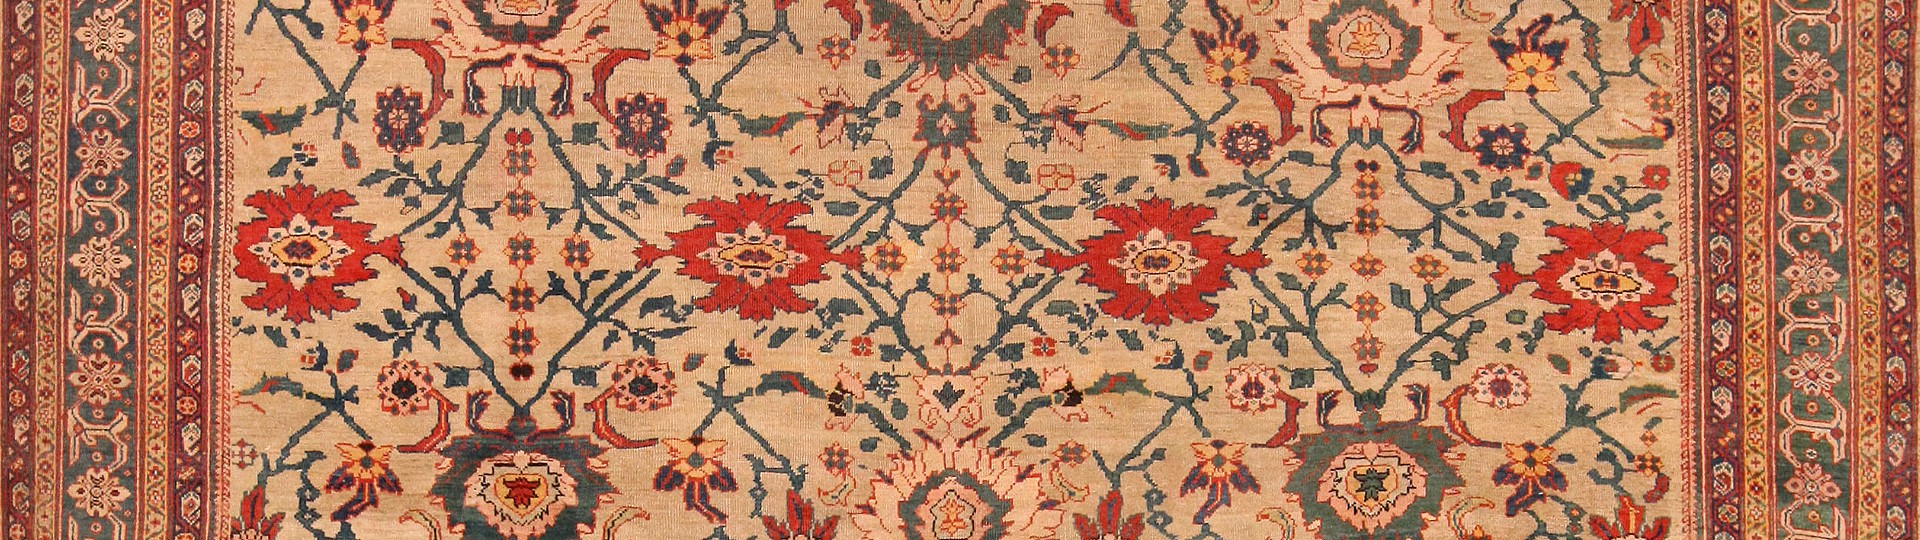 Antique, Vintage & Modern Rug Auction by Nazmiyal Auction